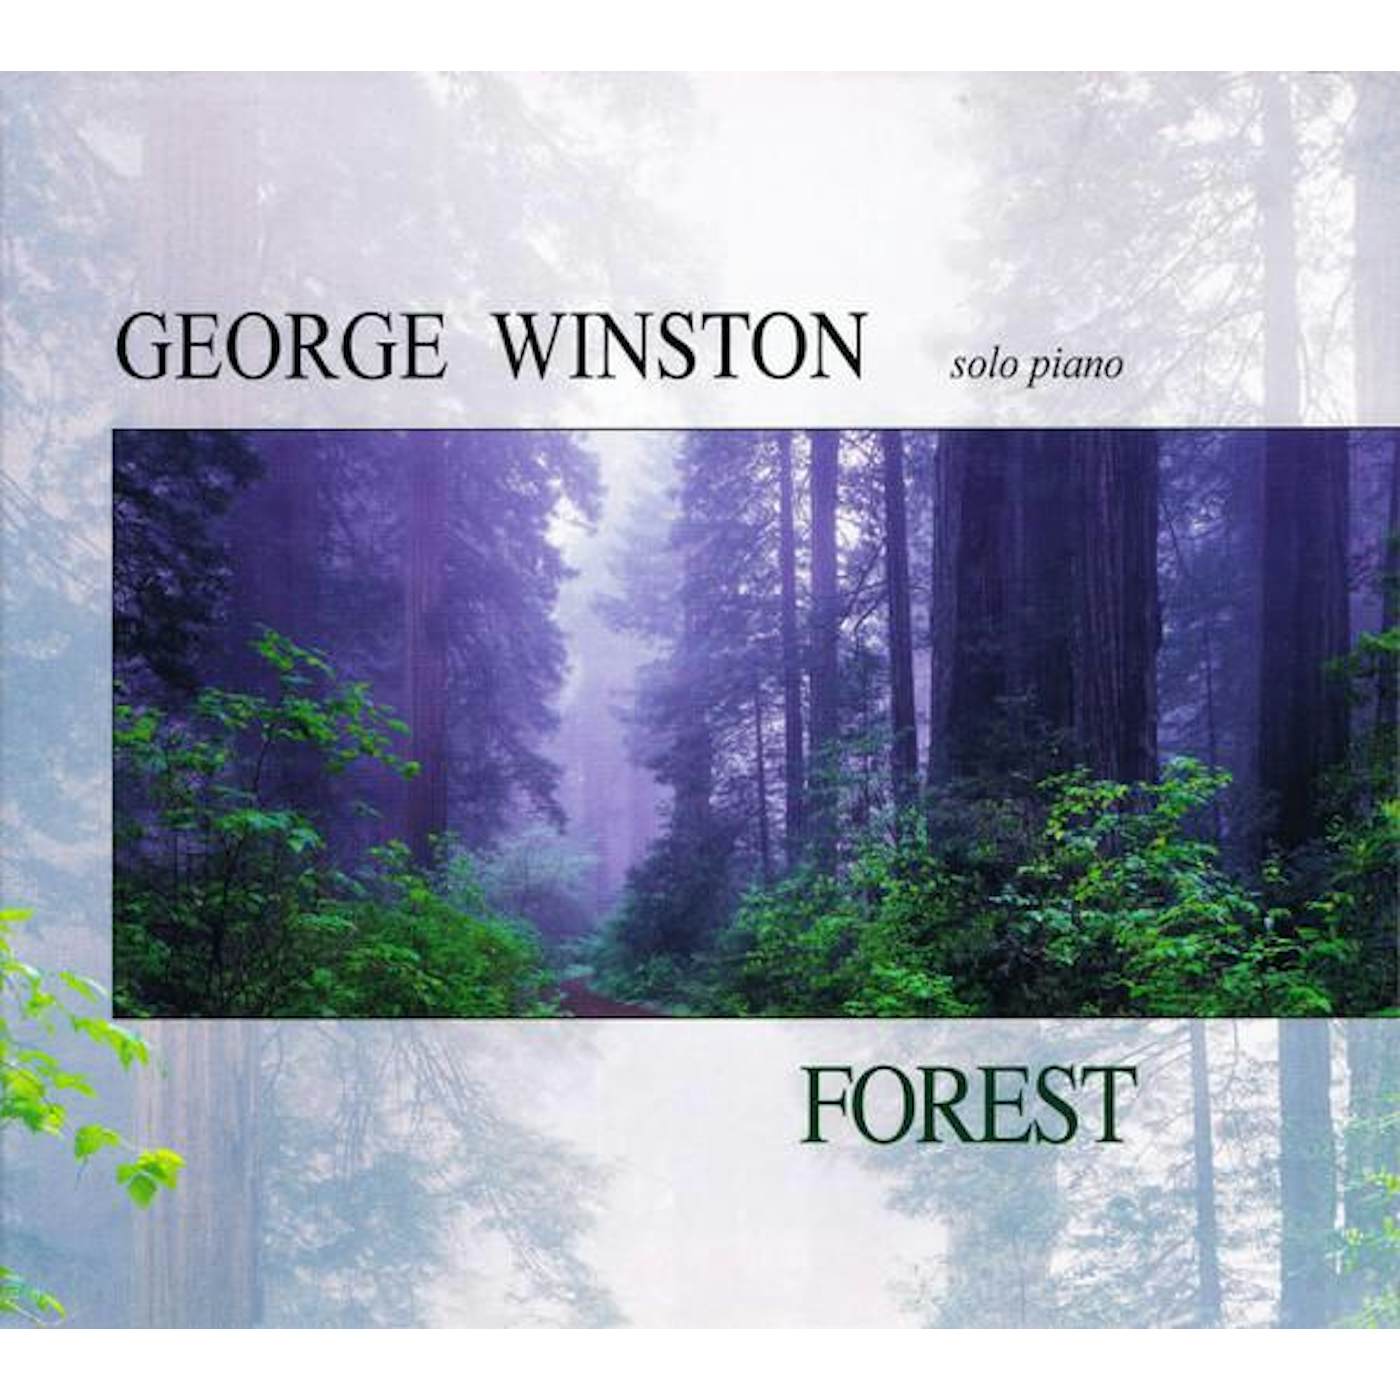 George Winston FOREST CD